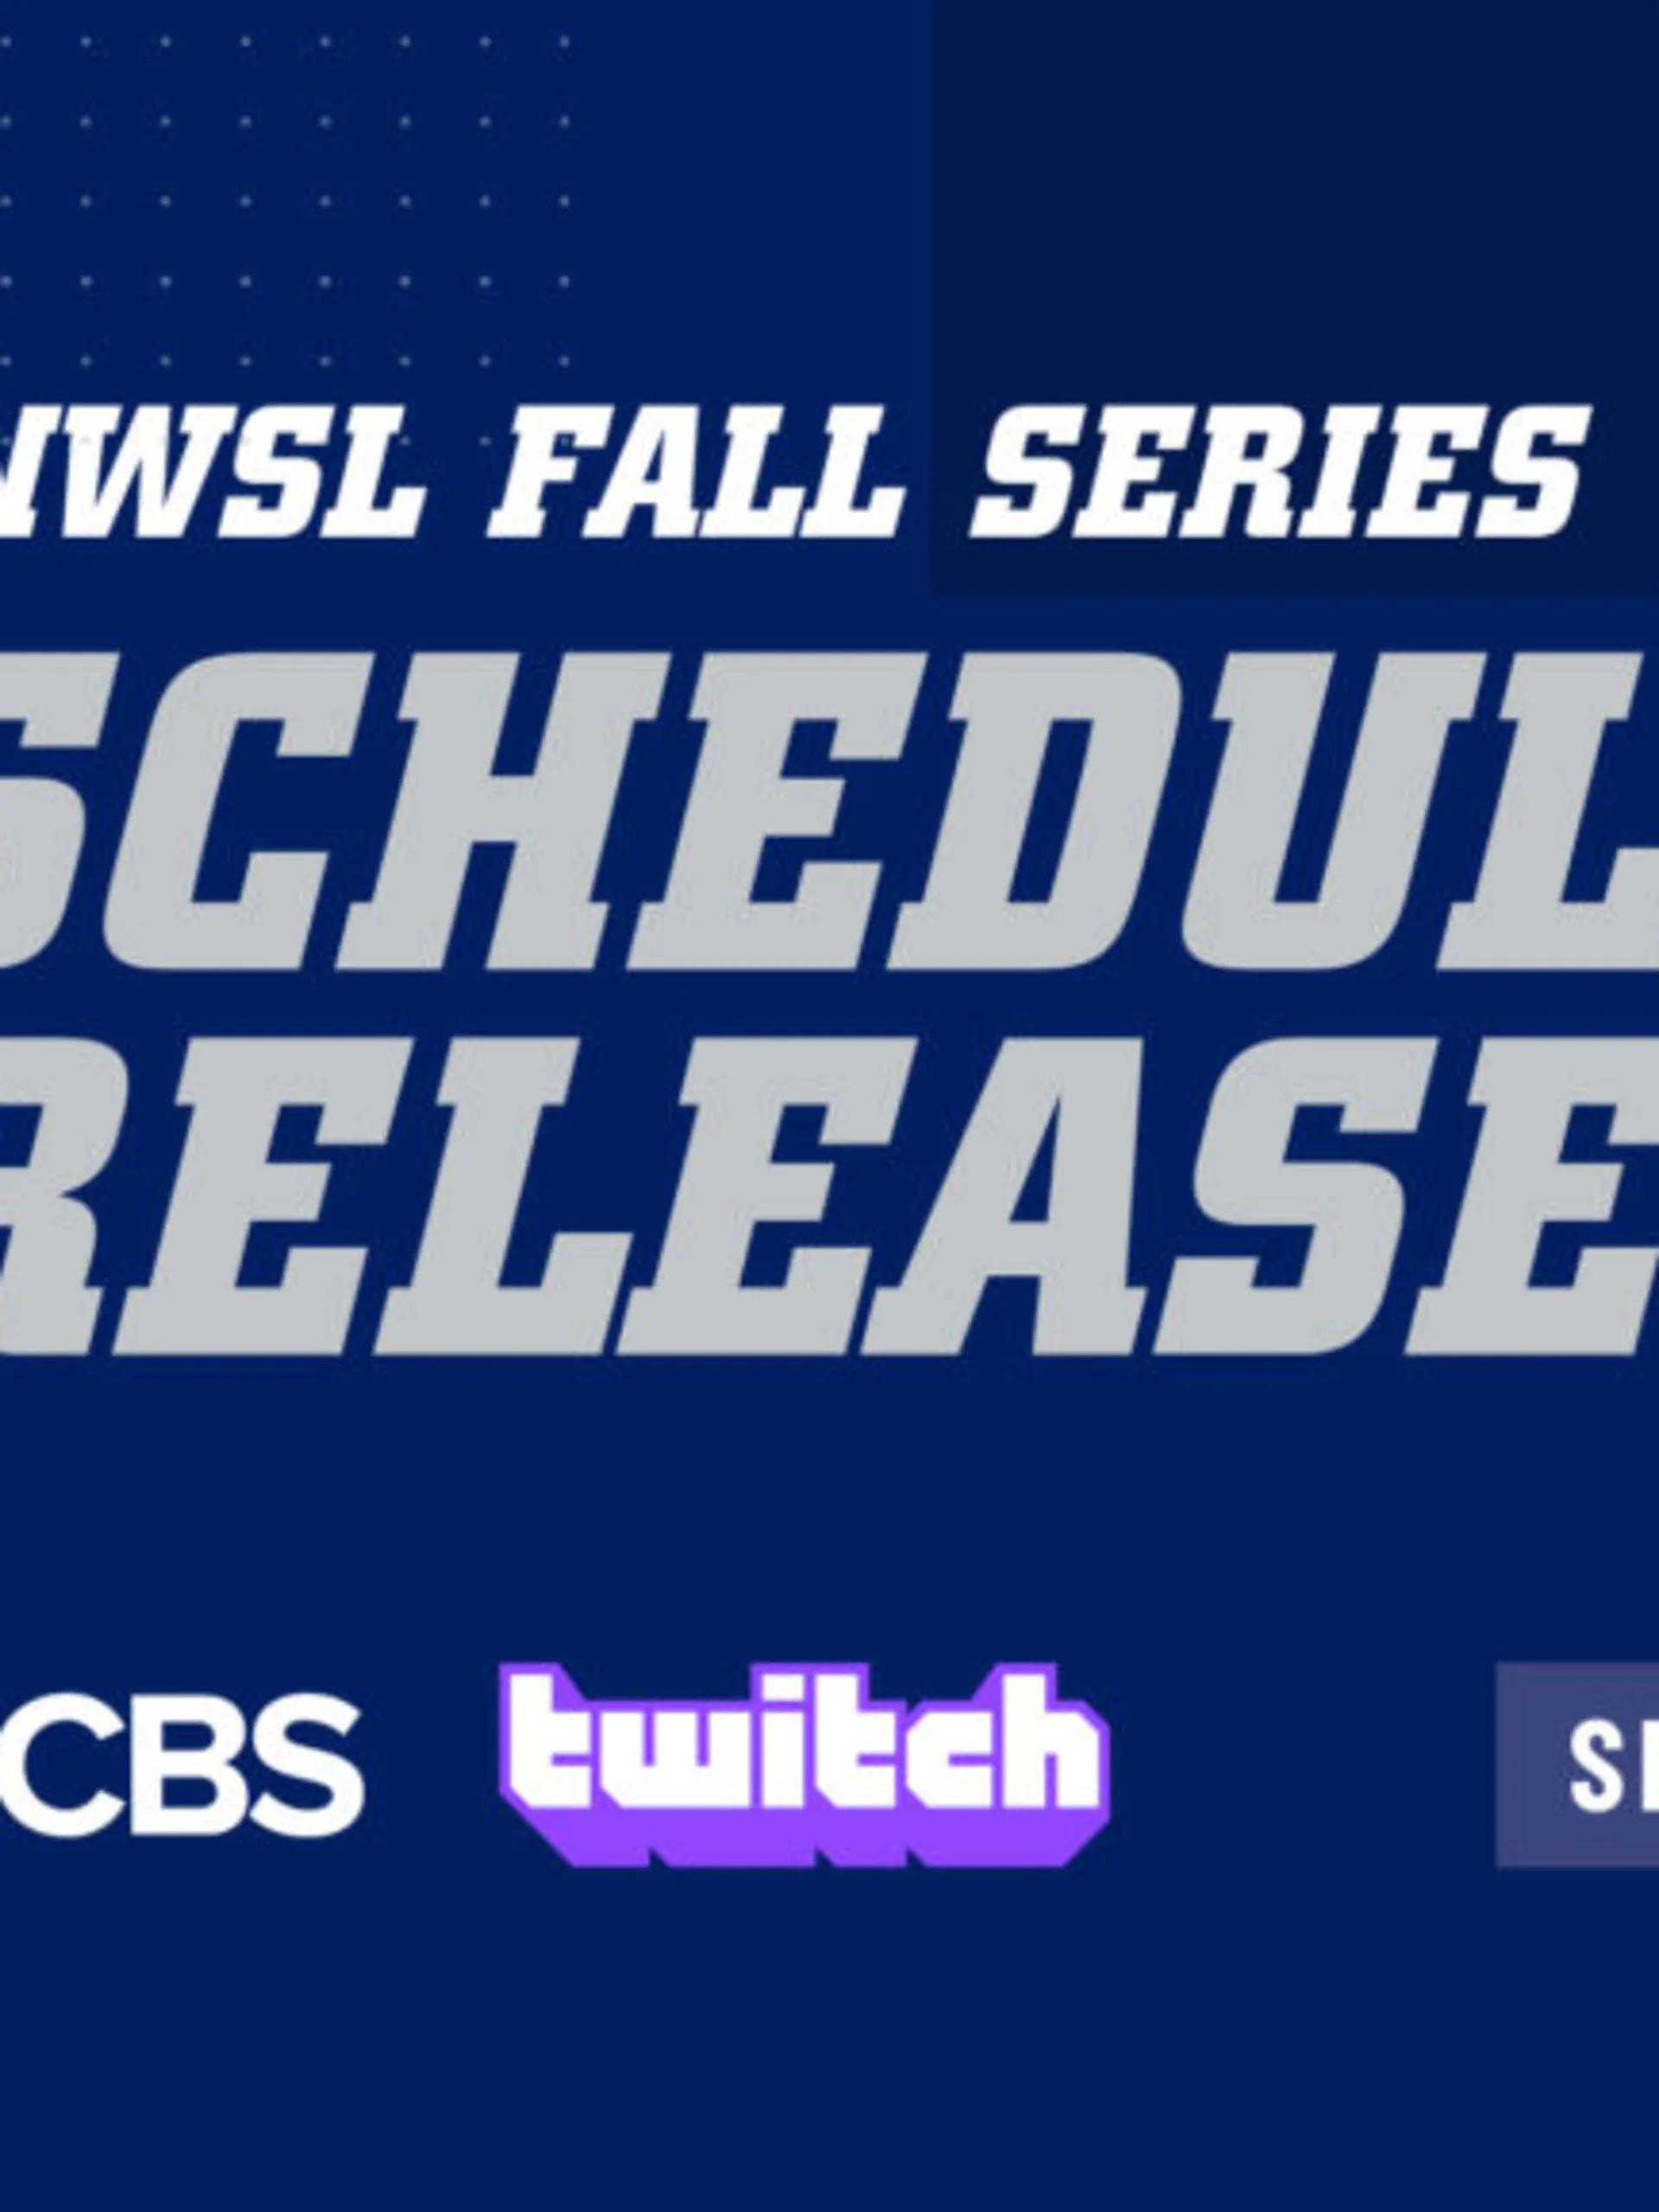 story-image-nwsl-announces-remaining-2020-fall-series-schedule-and-cbs-broadcast-talent